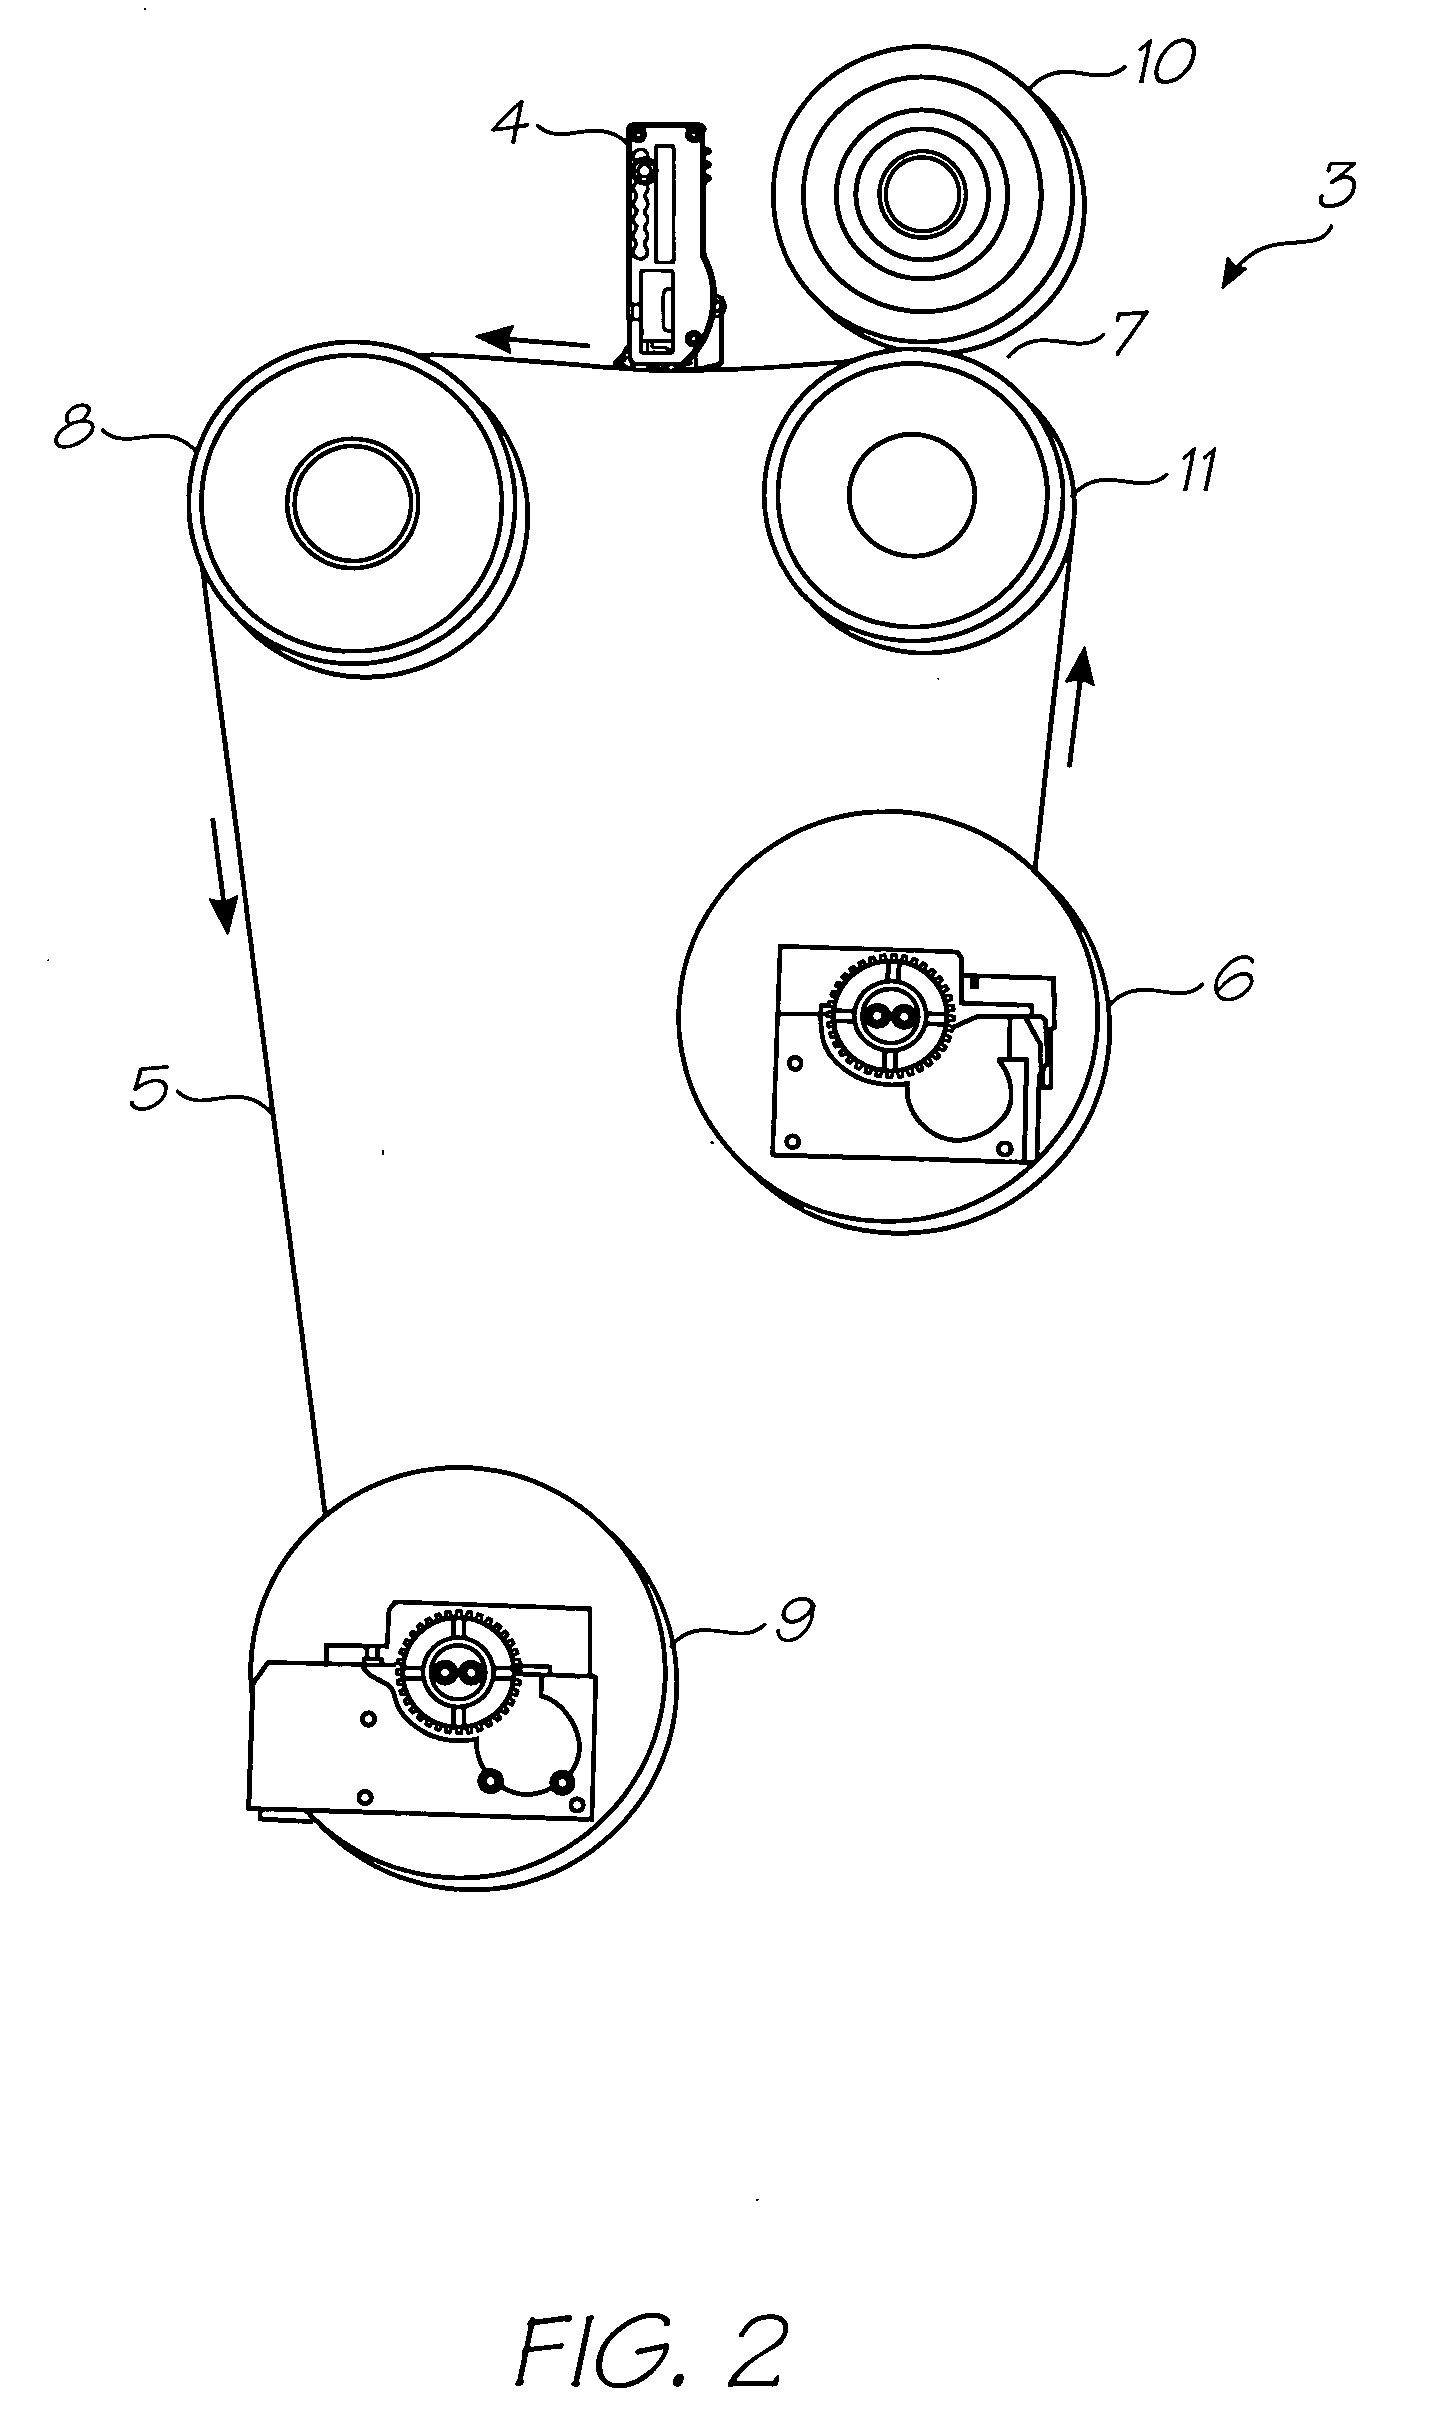 Method of printing with facile removal of print media roll from take-up spool